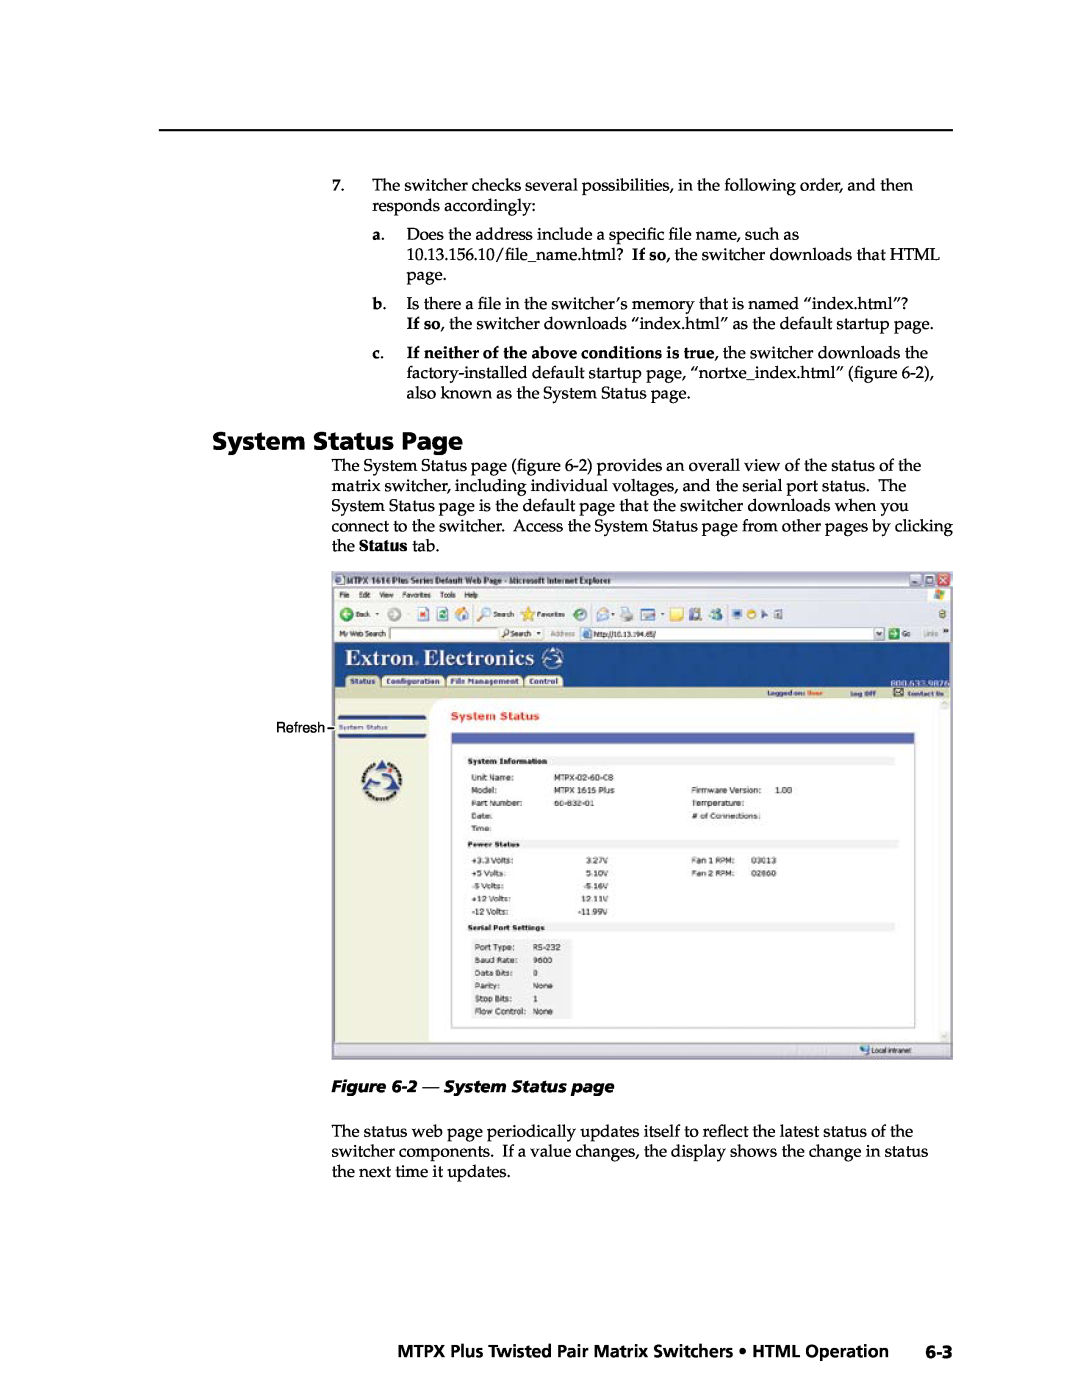 Extron electronic MTPX Plus Series manual System Status Page, 2 - System Status page 